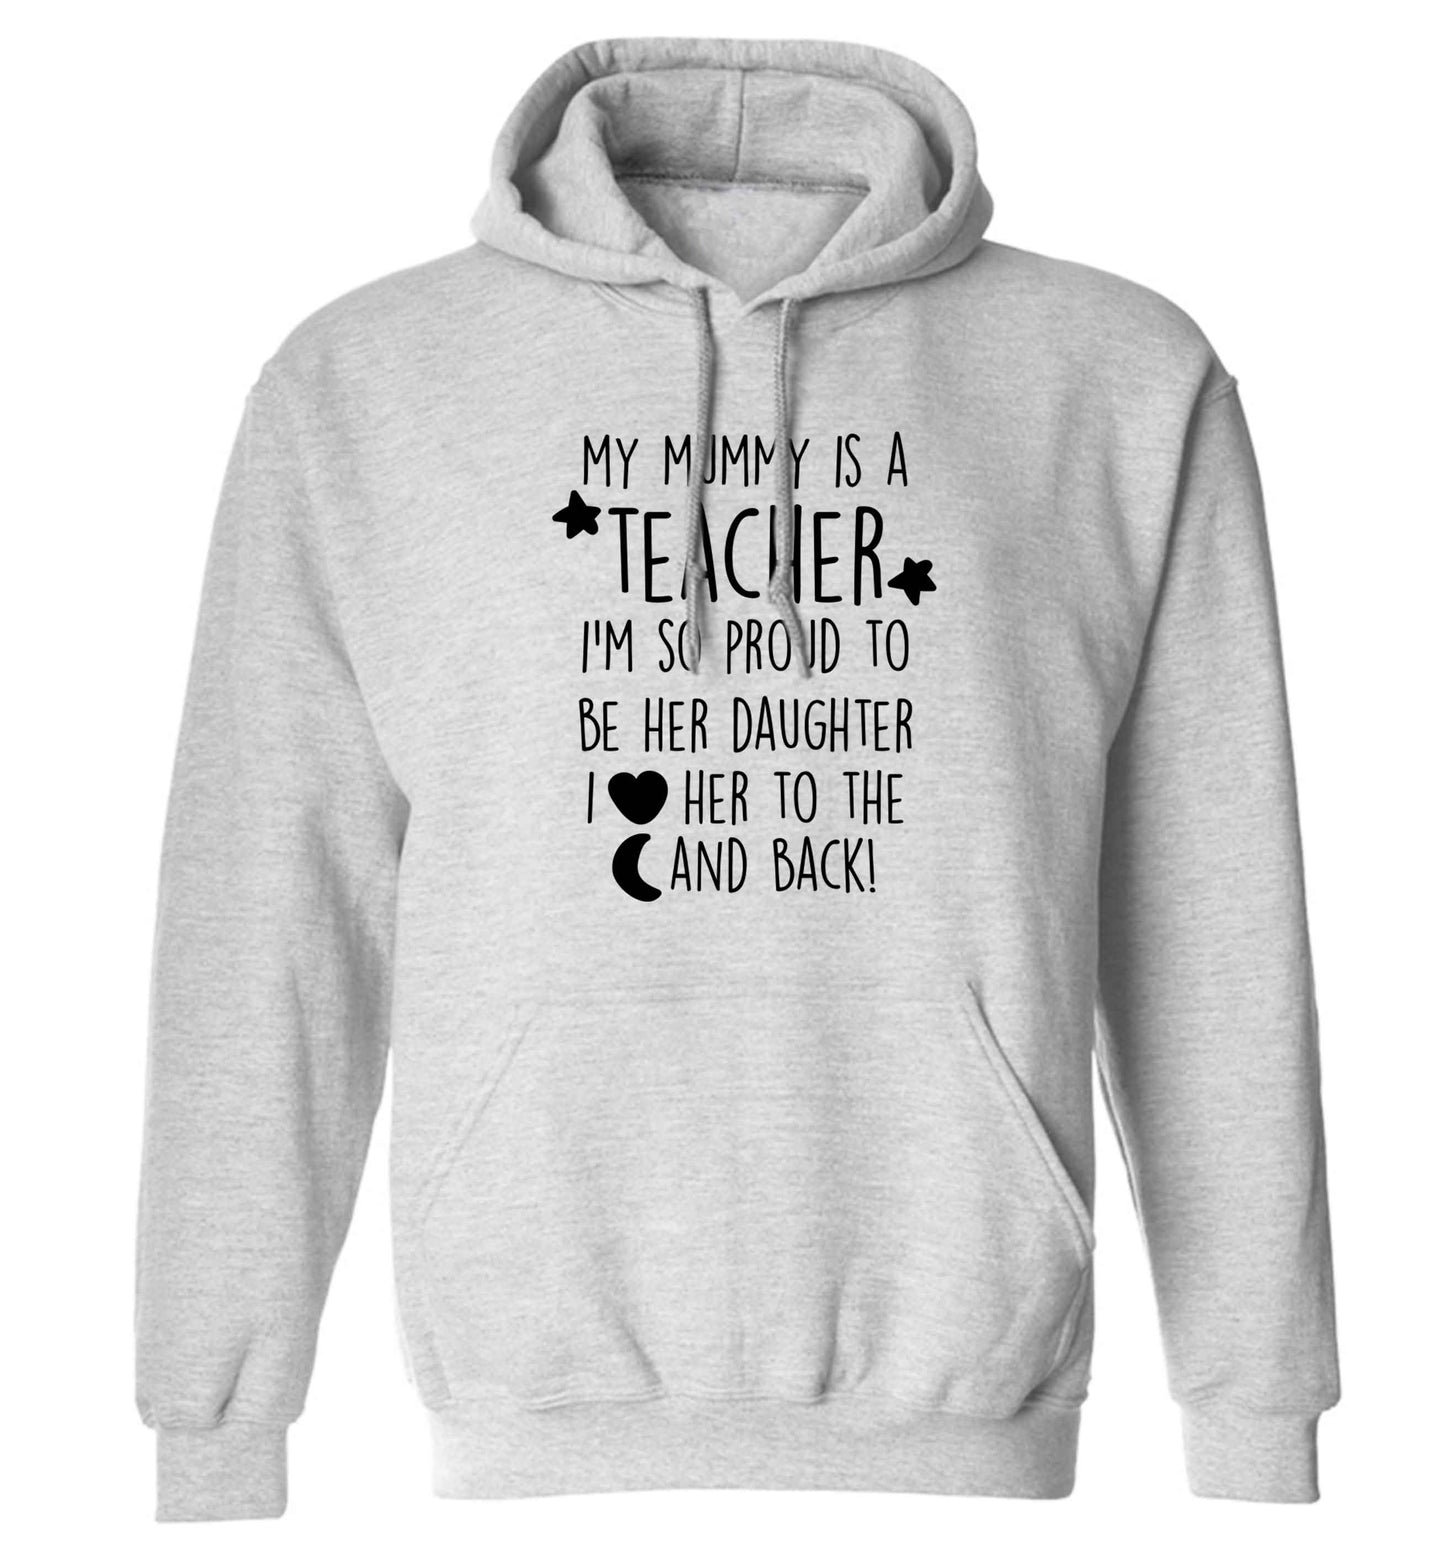 My mummy is a teacher I'm so proud to be her daughter I love her to the moon and back adults unisex grey hoodie 2XL